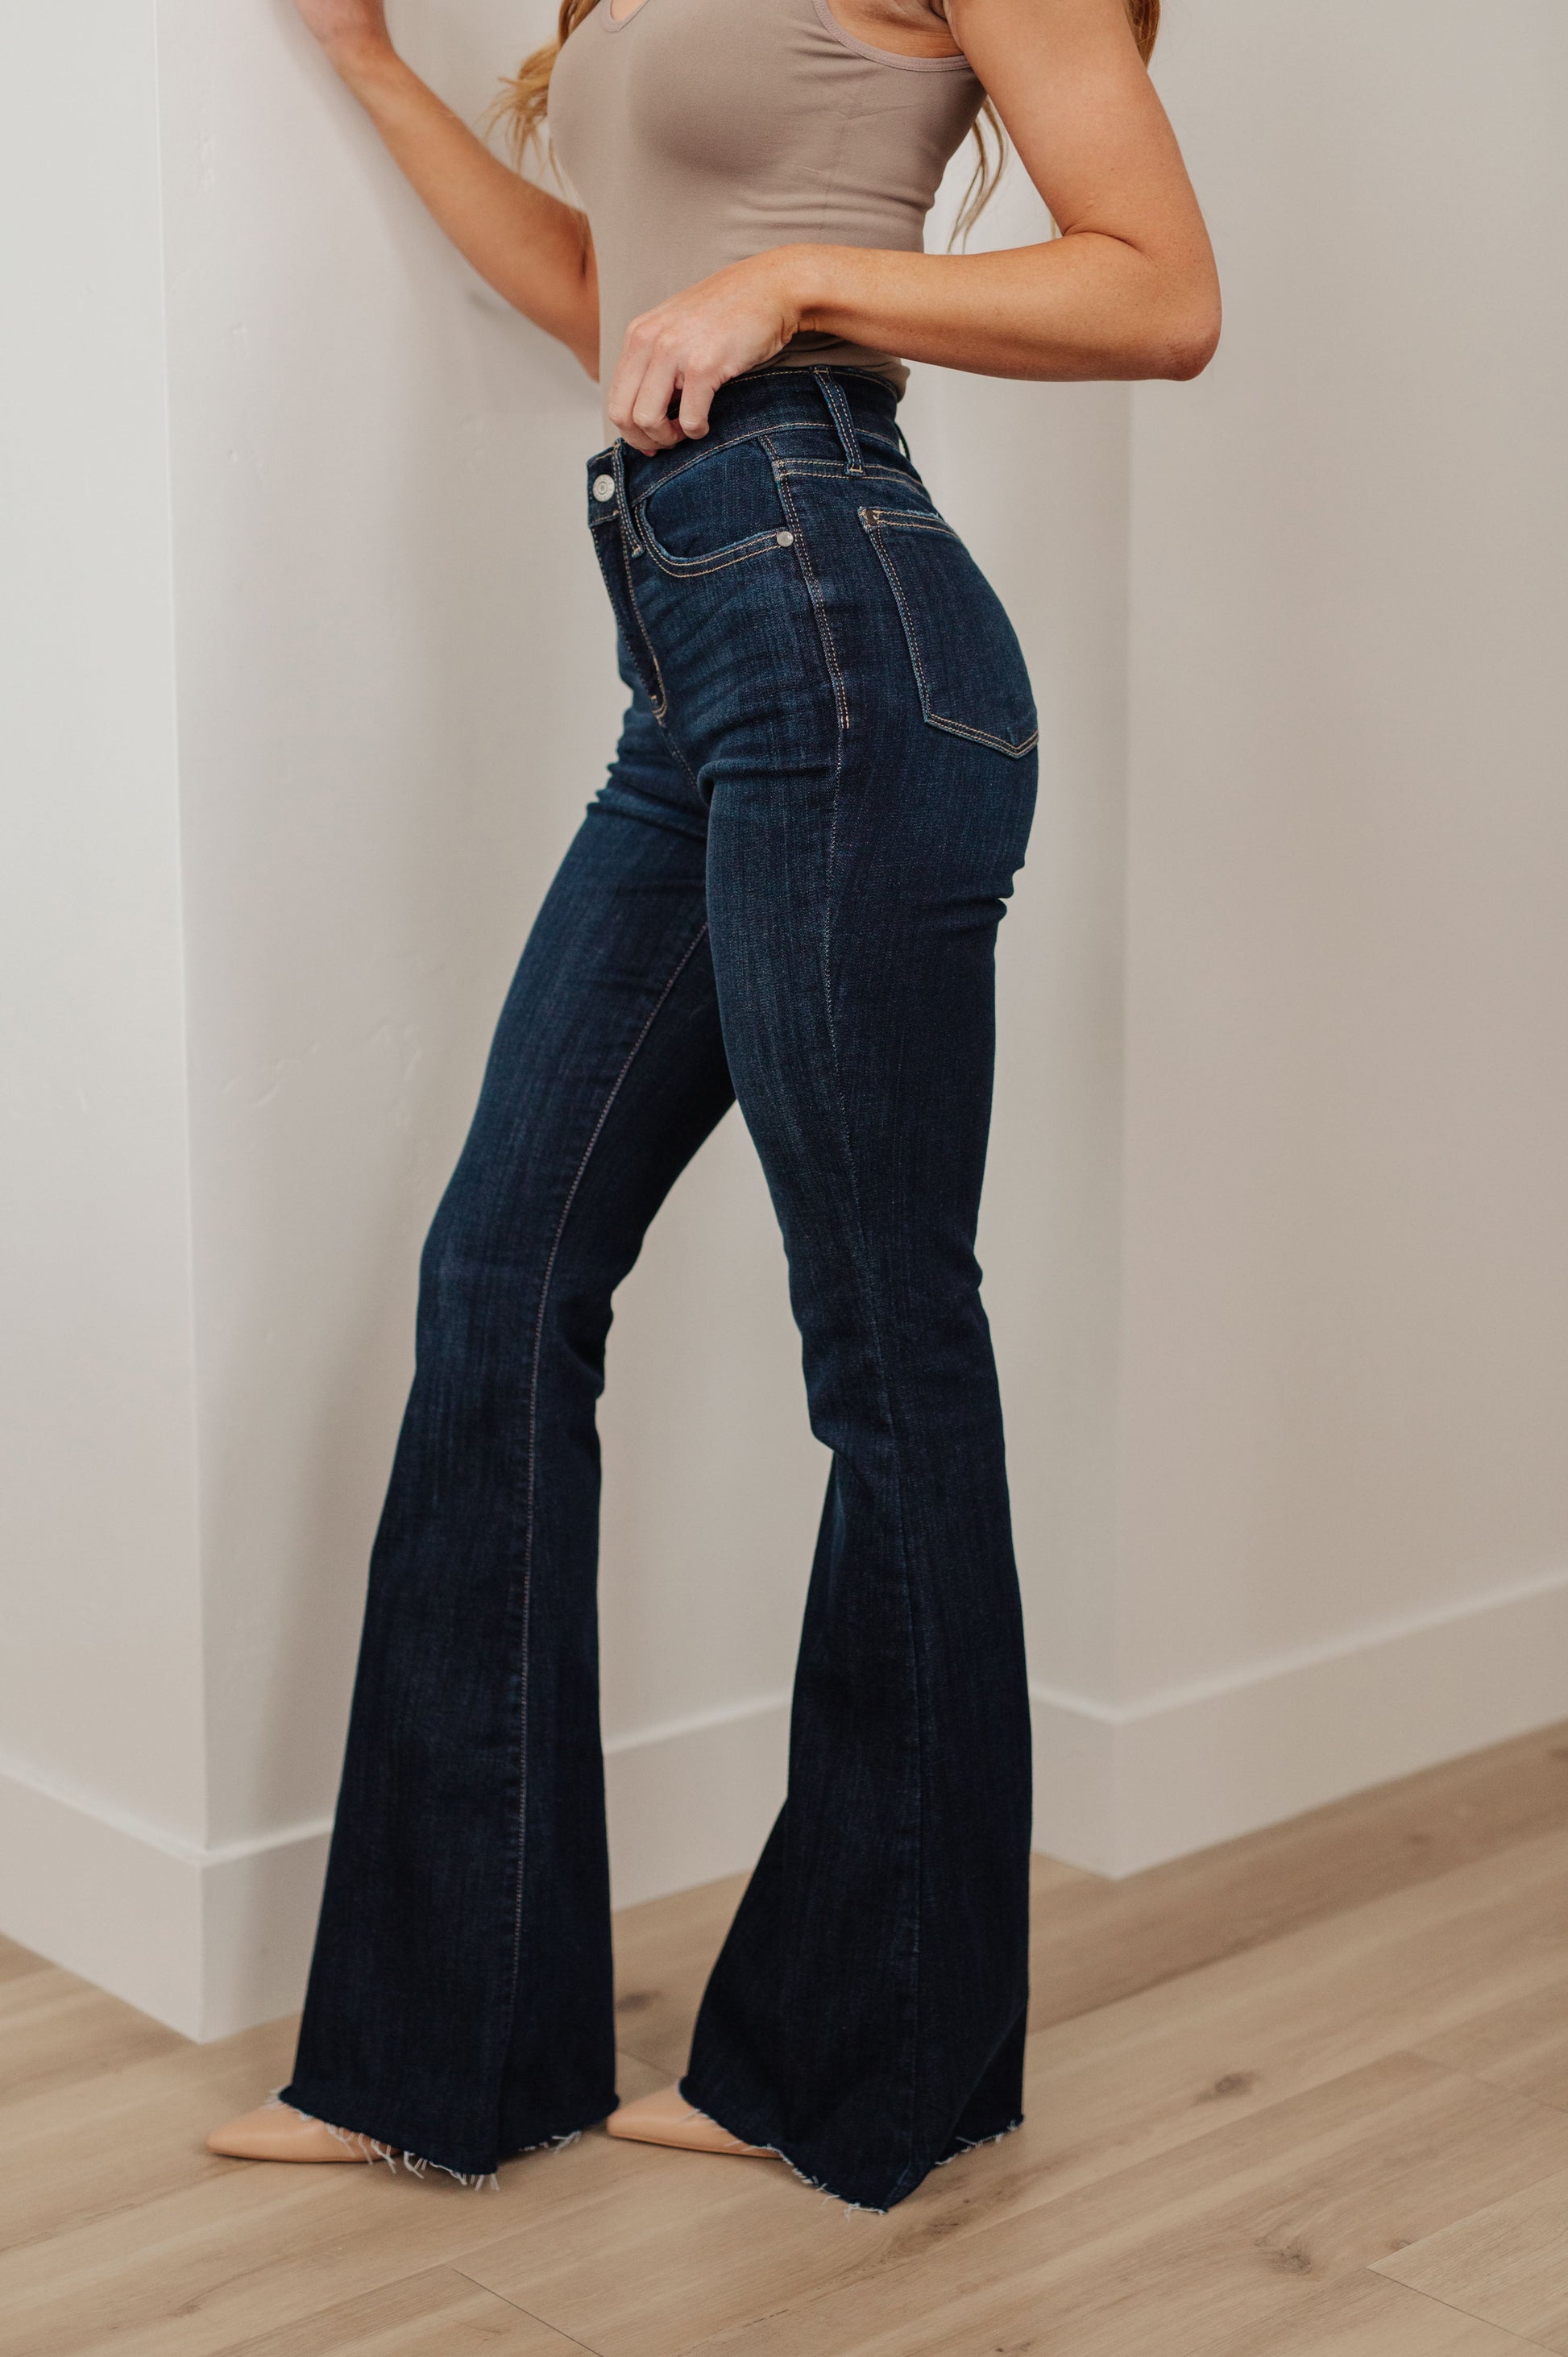 Our Jane High Rise Raw Hem Flare Jeans from Judy Blue are the perfect piece for any wardrobe. The high-rise design offers increased coverage, while the dark wash, classic flared silhouette and raw hem provide a timeless and effortless look. A great addition to any outfit. 0 -24W